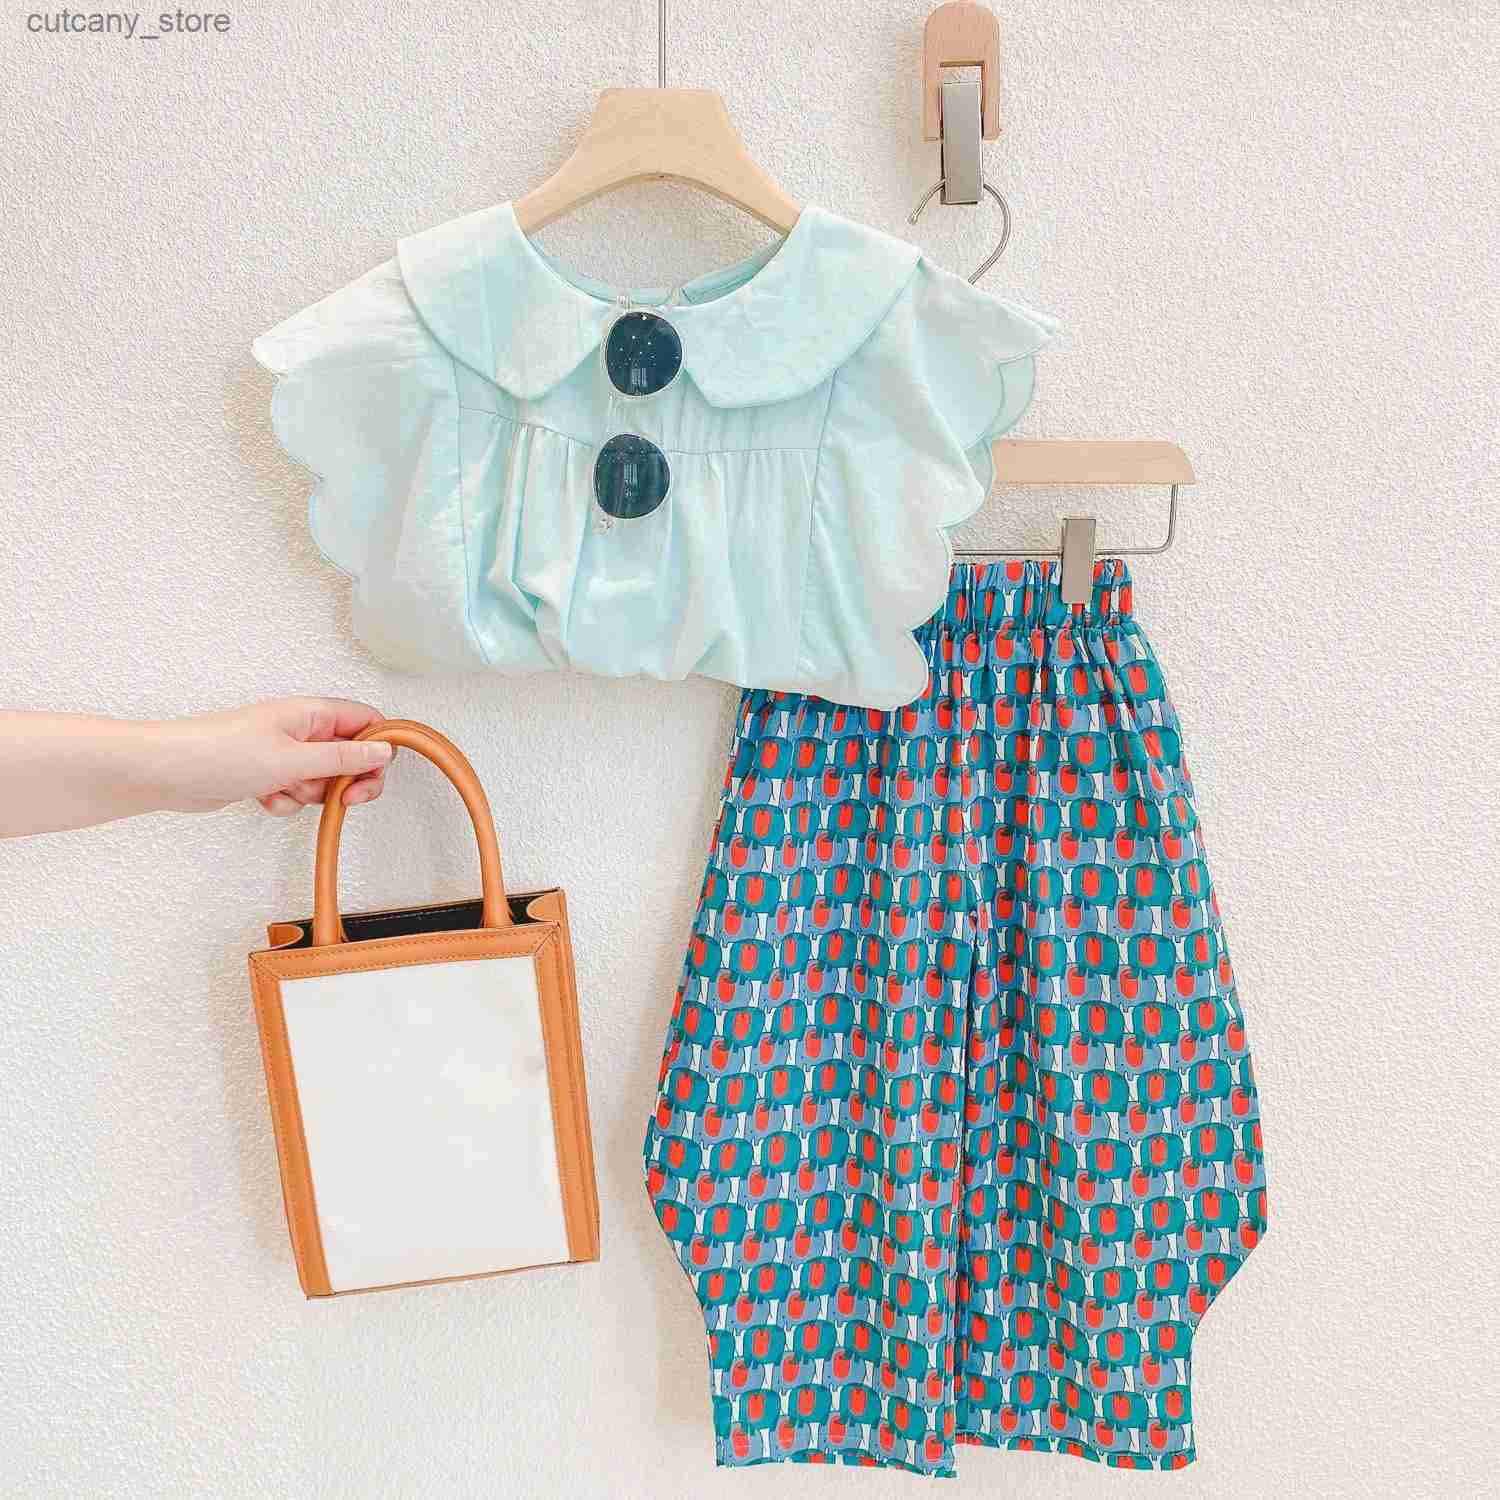 Trousers Summer Girls Clothing Sets Hong Kong Sty Doll Collar Wavy Sevess Top+Wide g Pants Baby Clothes Children Kids Outfits L46